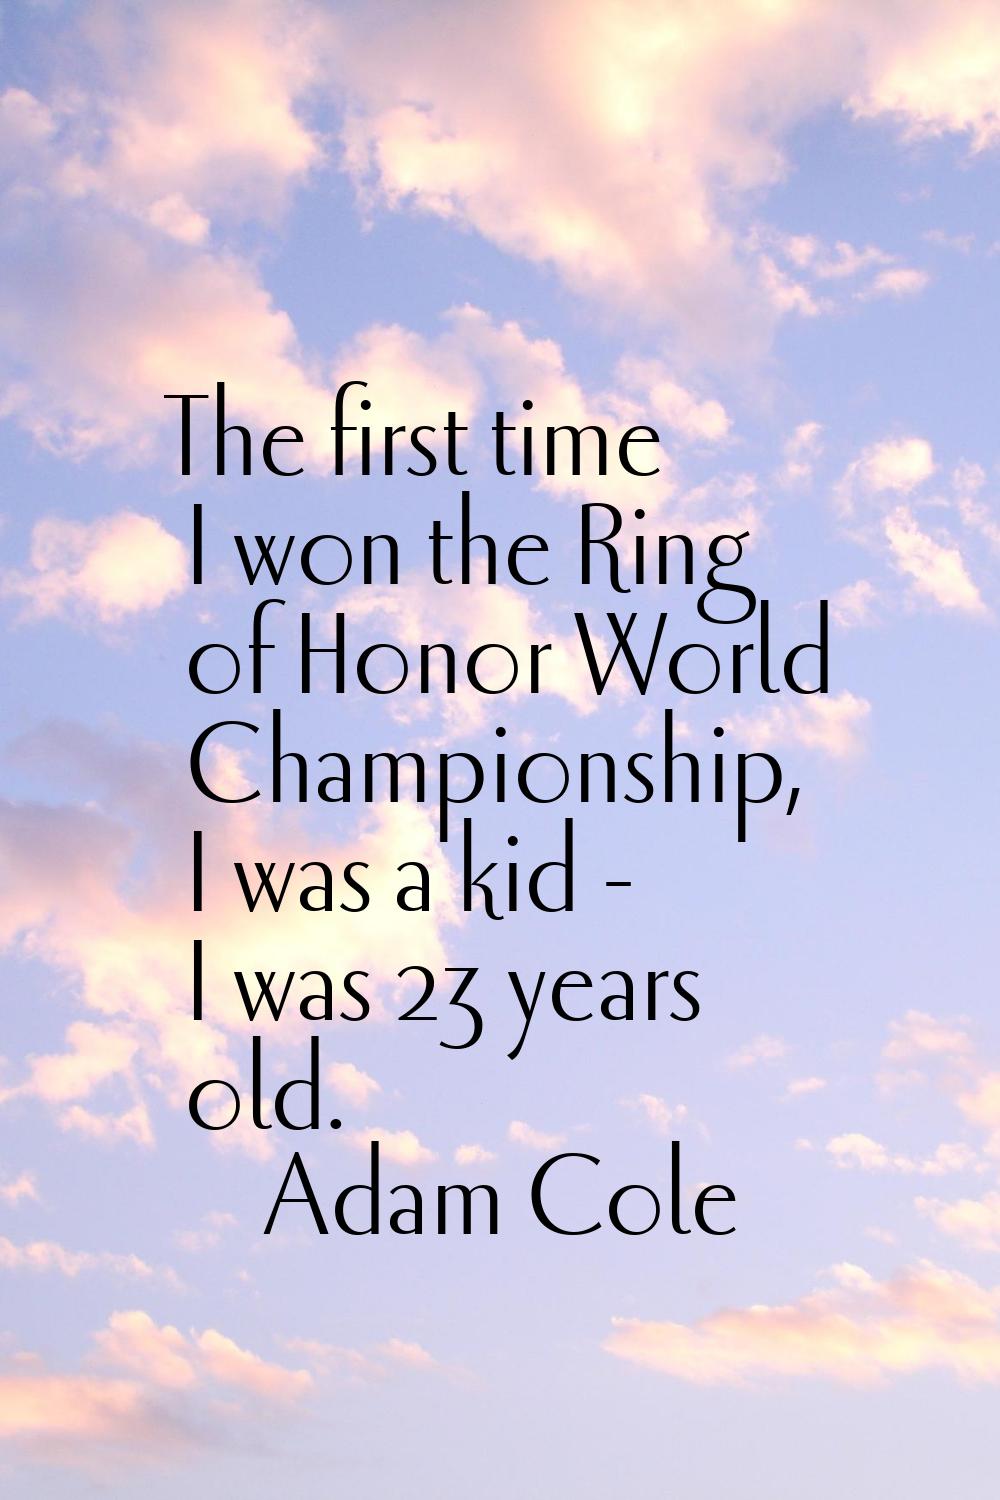 The first time I won the Ring of Honor World Championship, I was a kid - I was 23 years old.